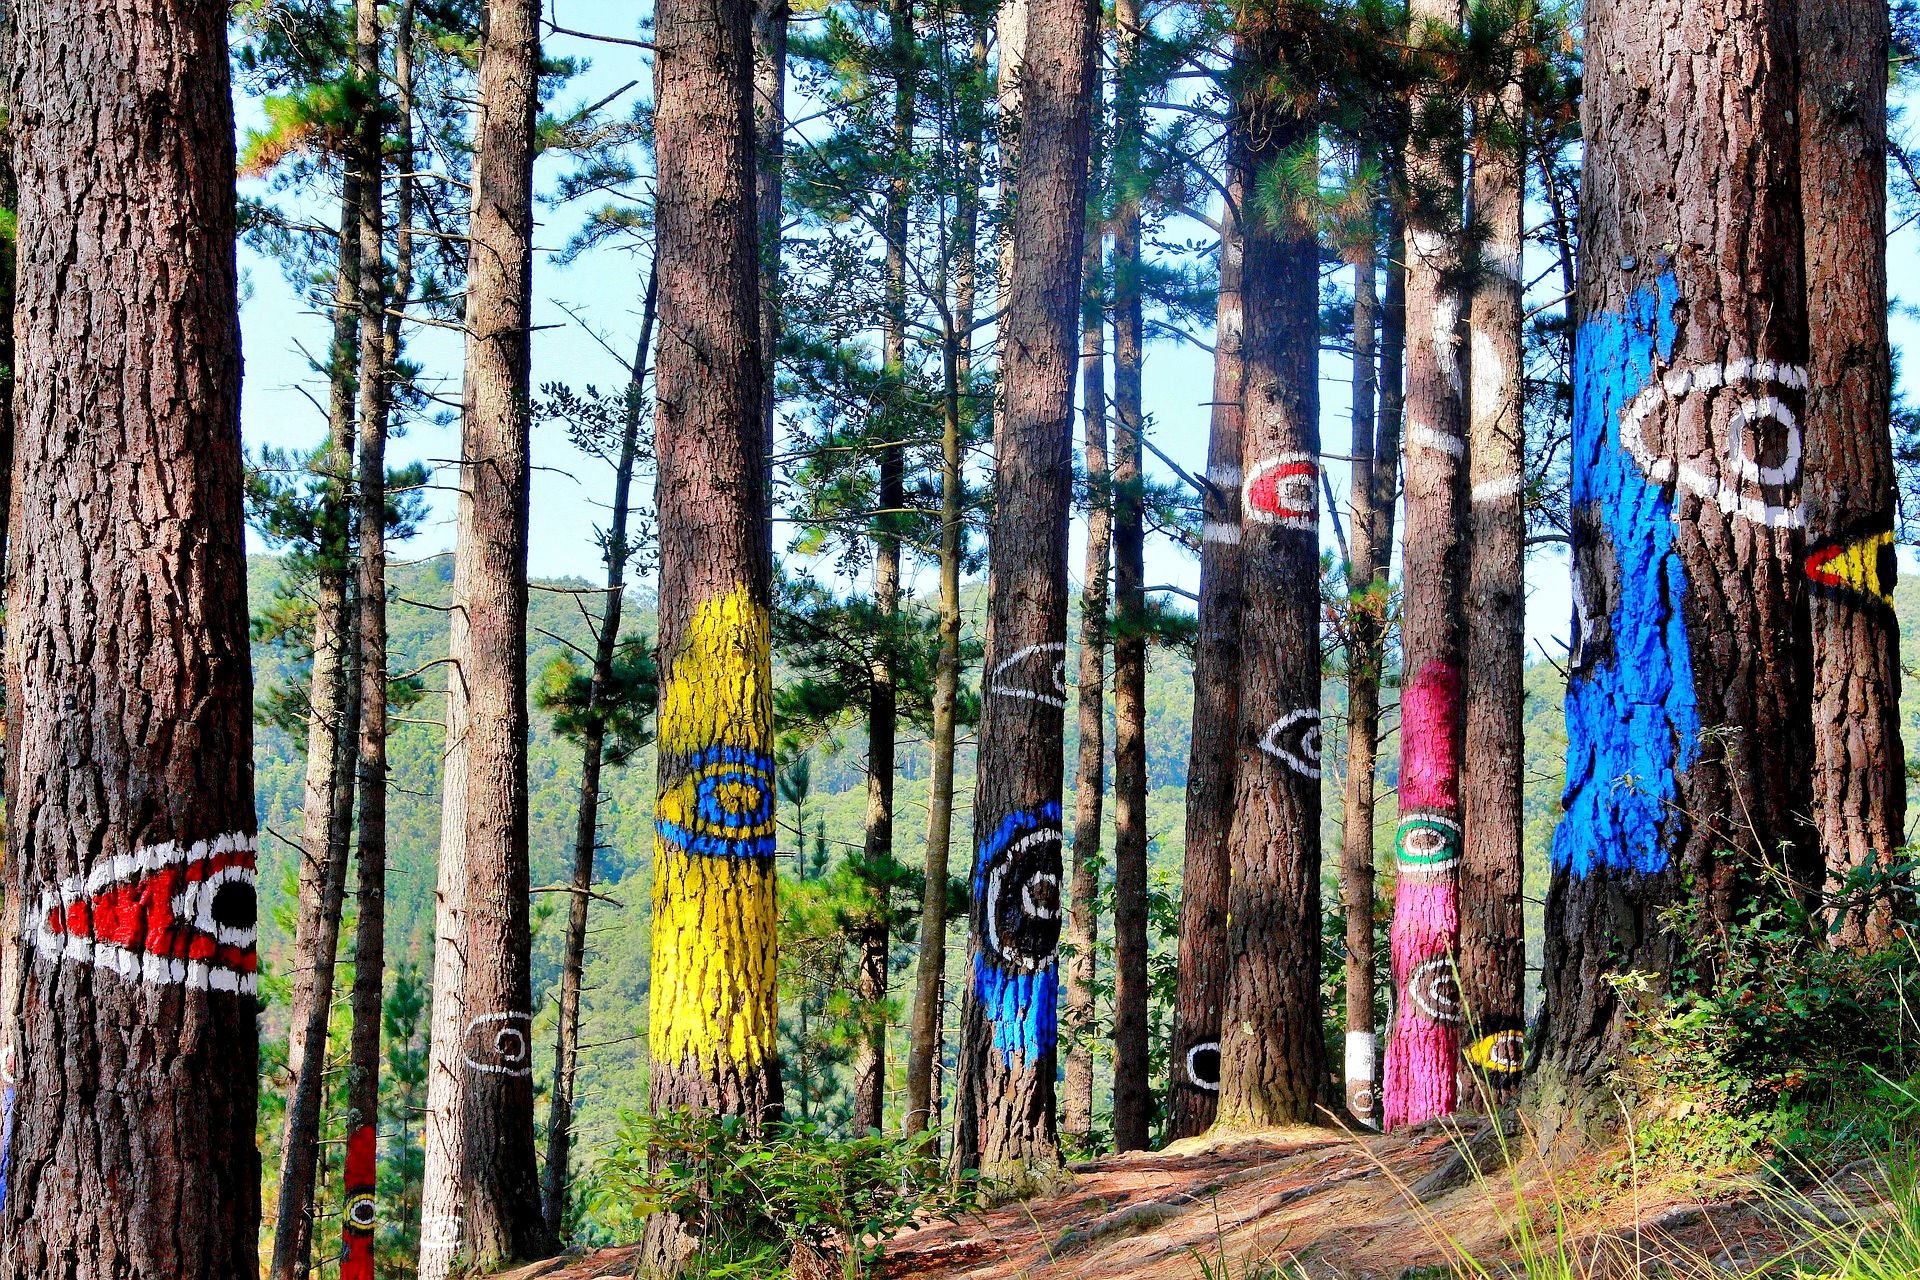 Visit the Painted Forest of Oma in Basque Country, Spain